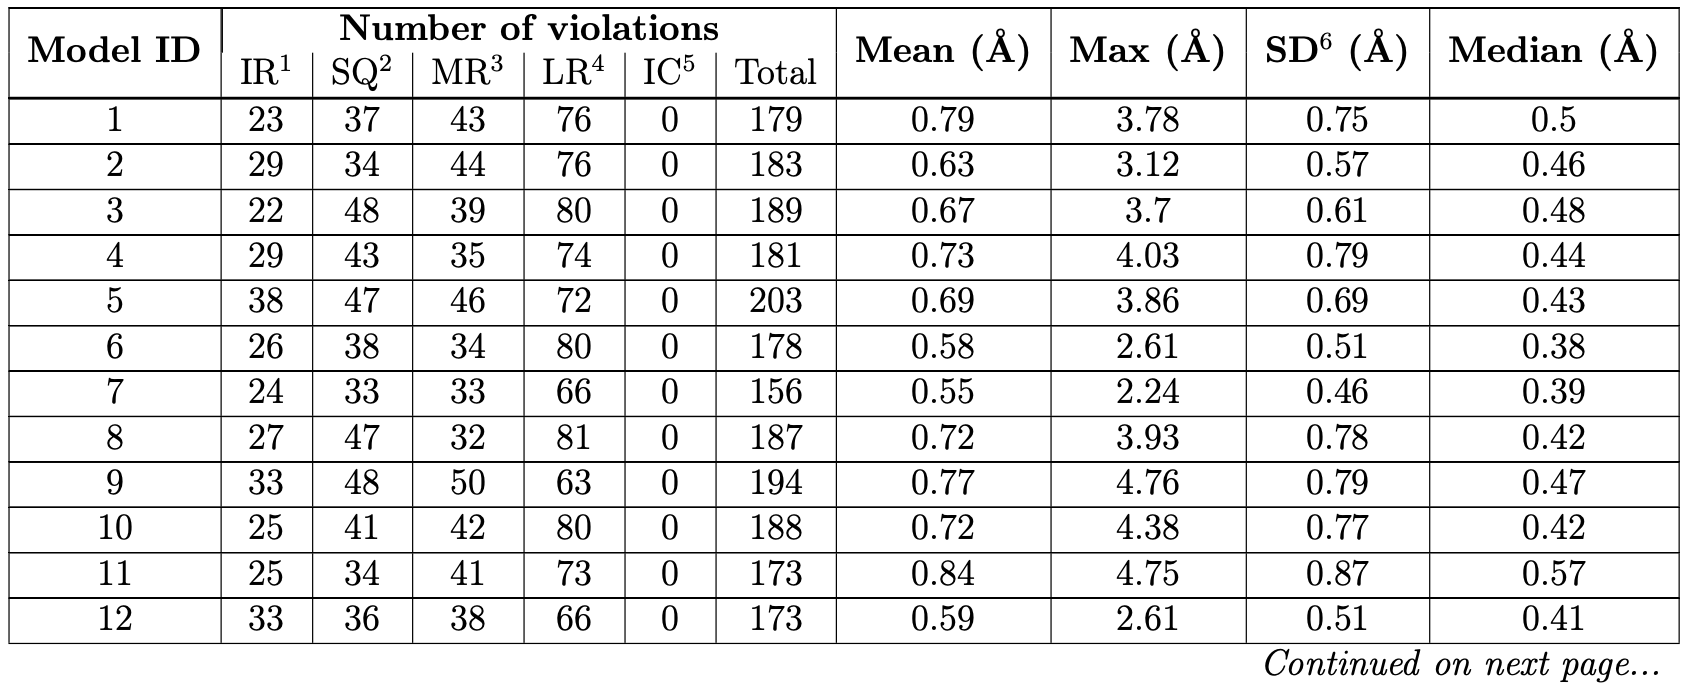 Distance violation in each model